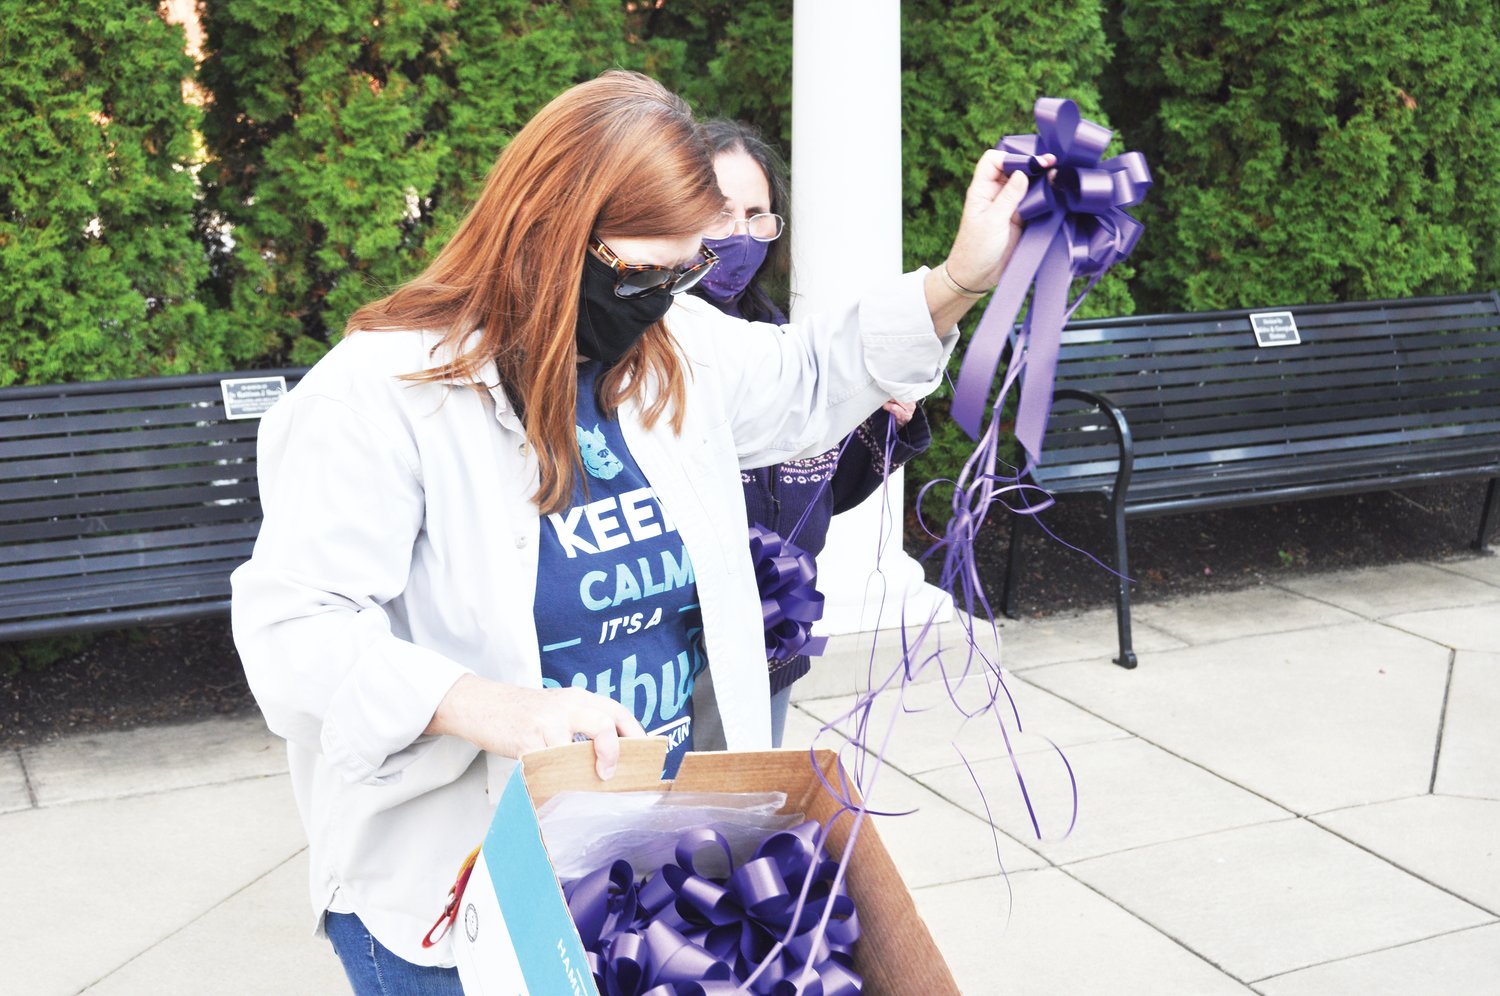 Deb Lee, an employee of the Family Crisis Shelter, takes a purple ribbon out of a box to hang in Marie Canine Plaza Tuesday, as co-worker Kathy Walker looks on. The shelter tied ribbons throughout downtown in observance of Domestic Violence Awareness Month. While the number of clients in the shelter's residential services has declined this year, the use of some outreach programs has quadrupled during the coronavirus pandemic, executive director Anita Byers says. Advocates are using the month to promote resources available to domestic violence survivors. The shelter's 24-7 hotline is 765-362-2030 or 800-370-4103.